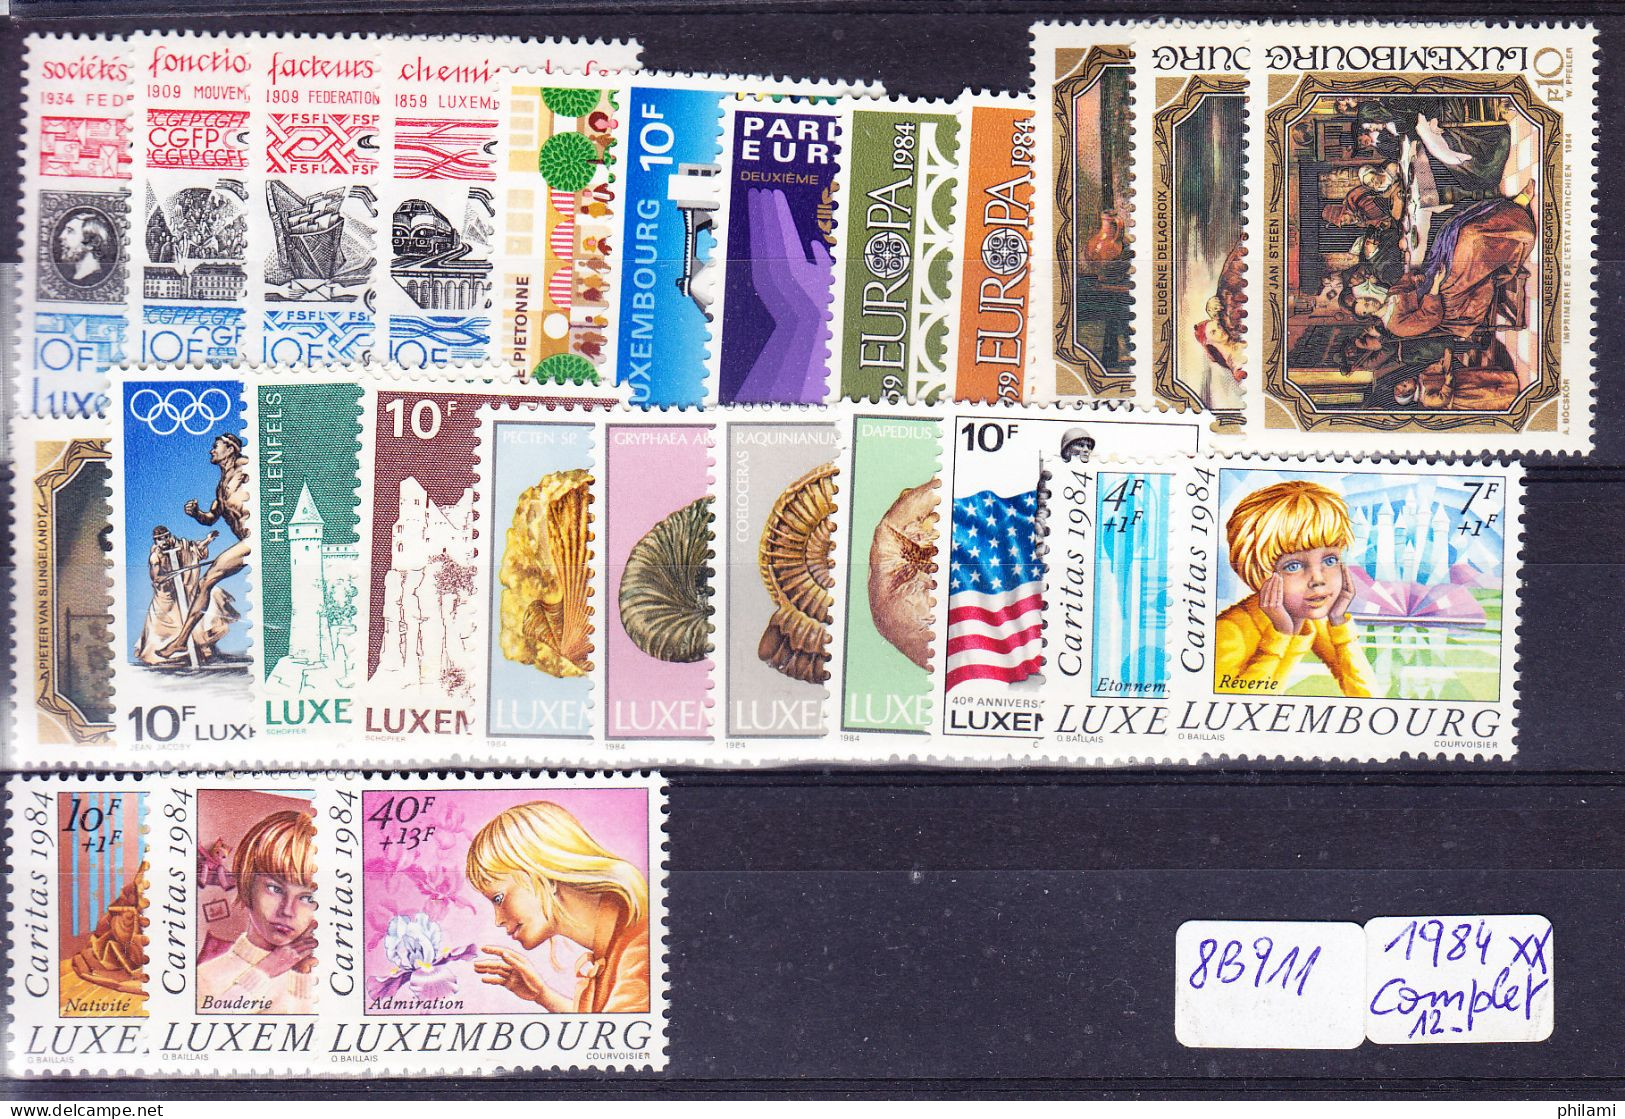 LUXEMBOURG ANNEE COMPLETE 1984 ** MNH . (8B911) - Années Complètes